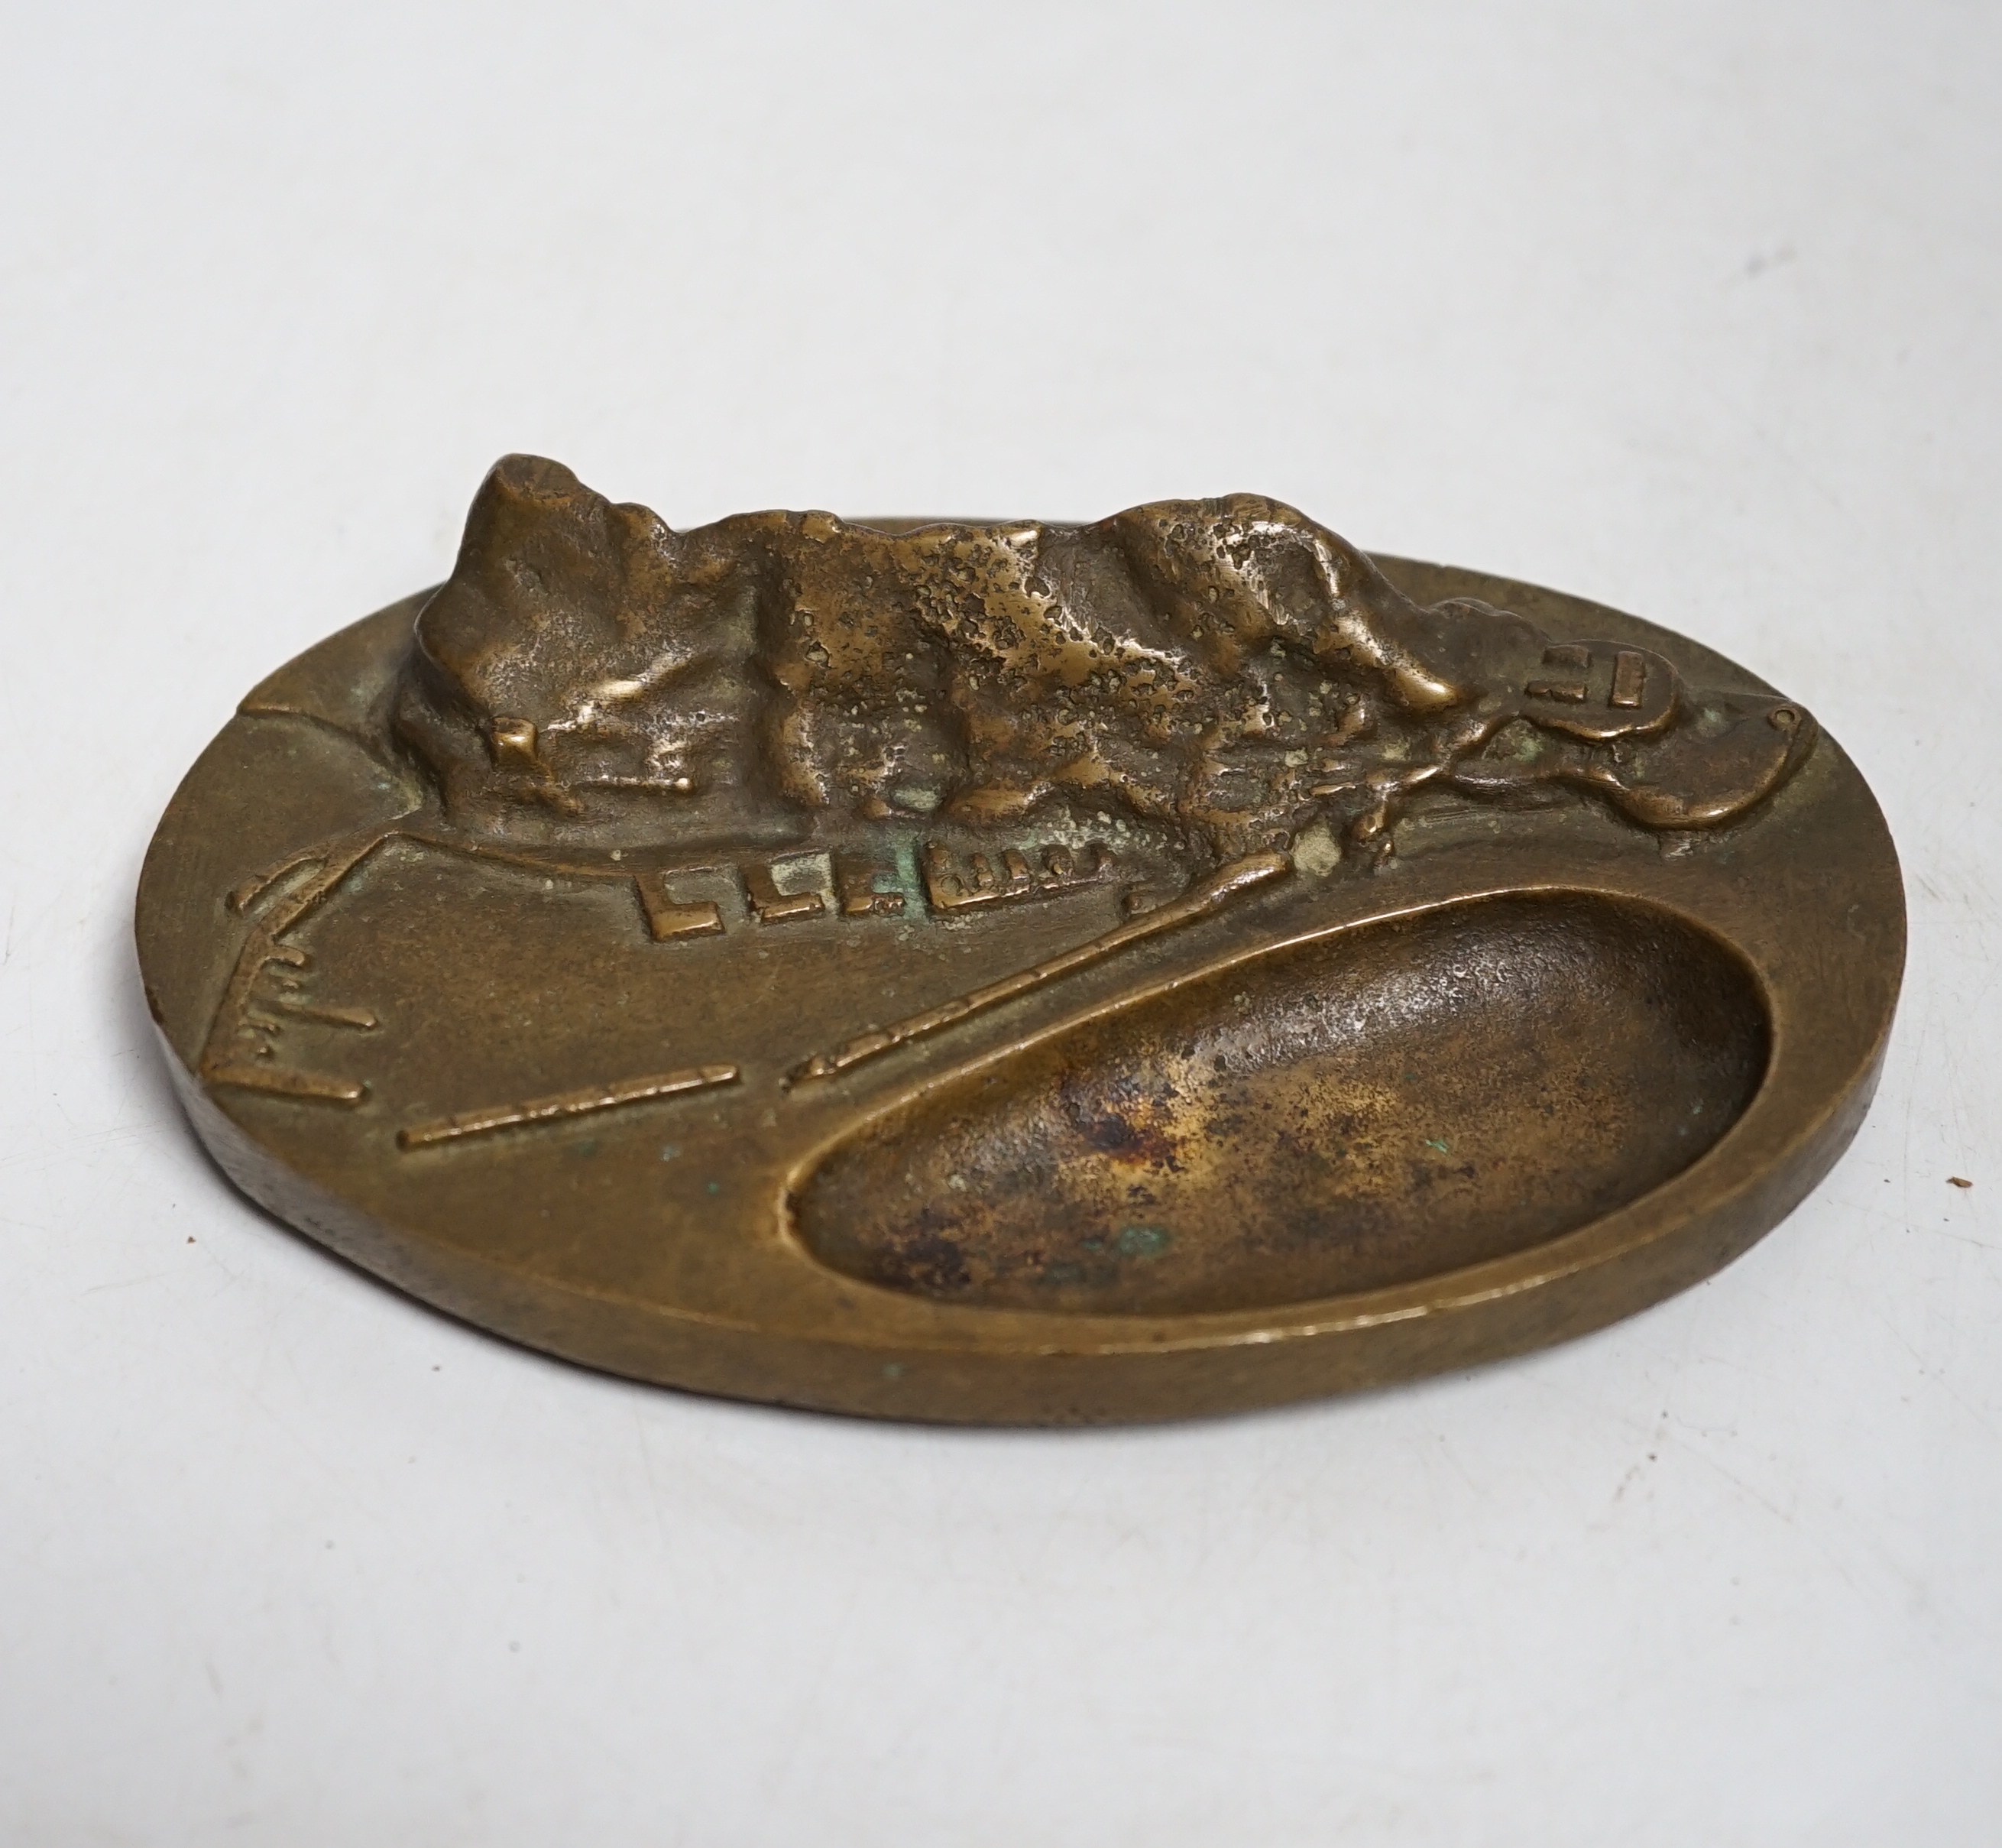 A cast bronze Admiralty desk-stand Gibraltar Harbour and Rock, 15.5cm